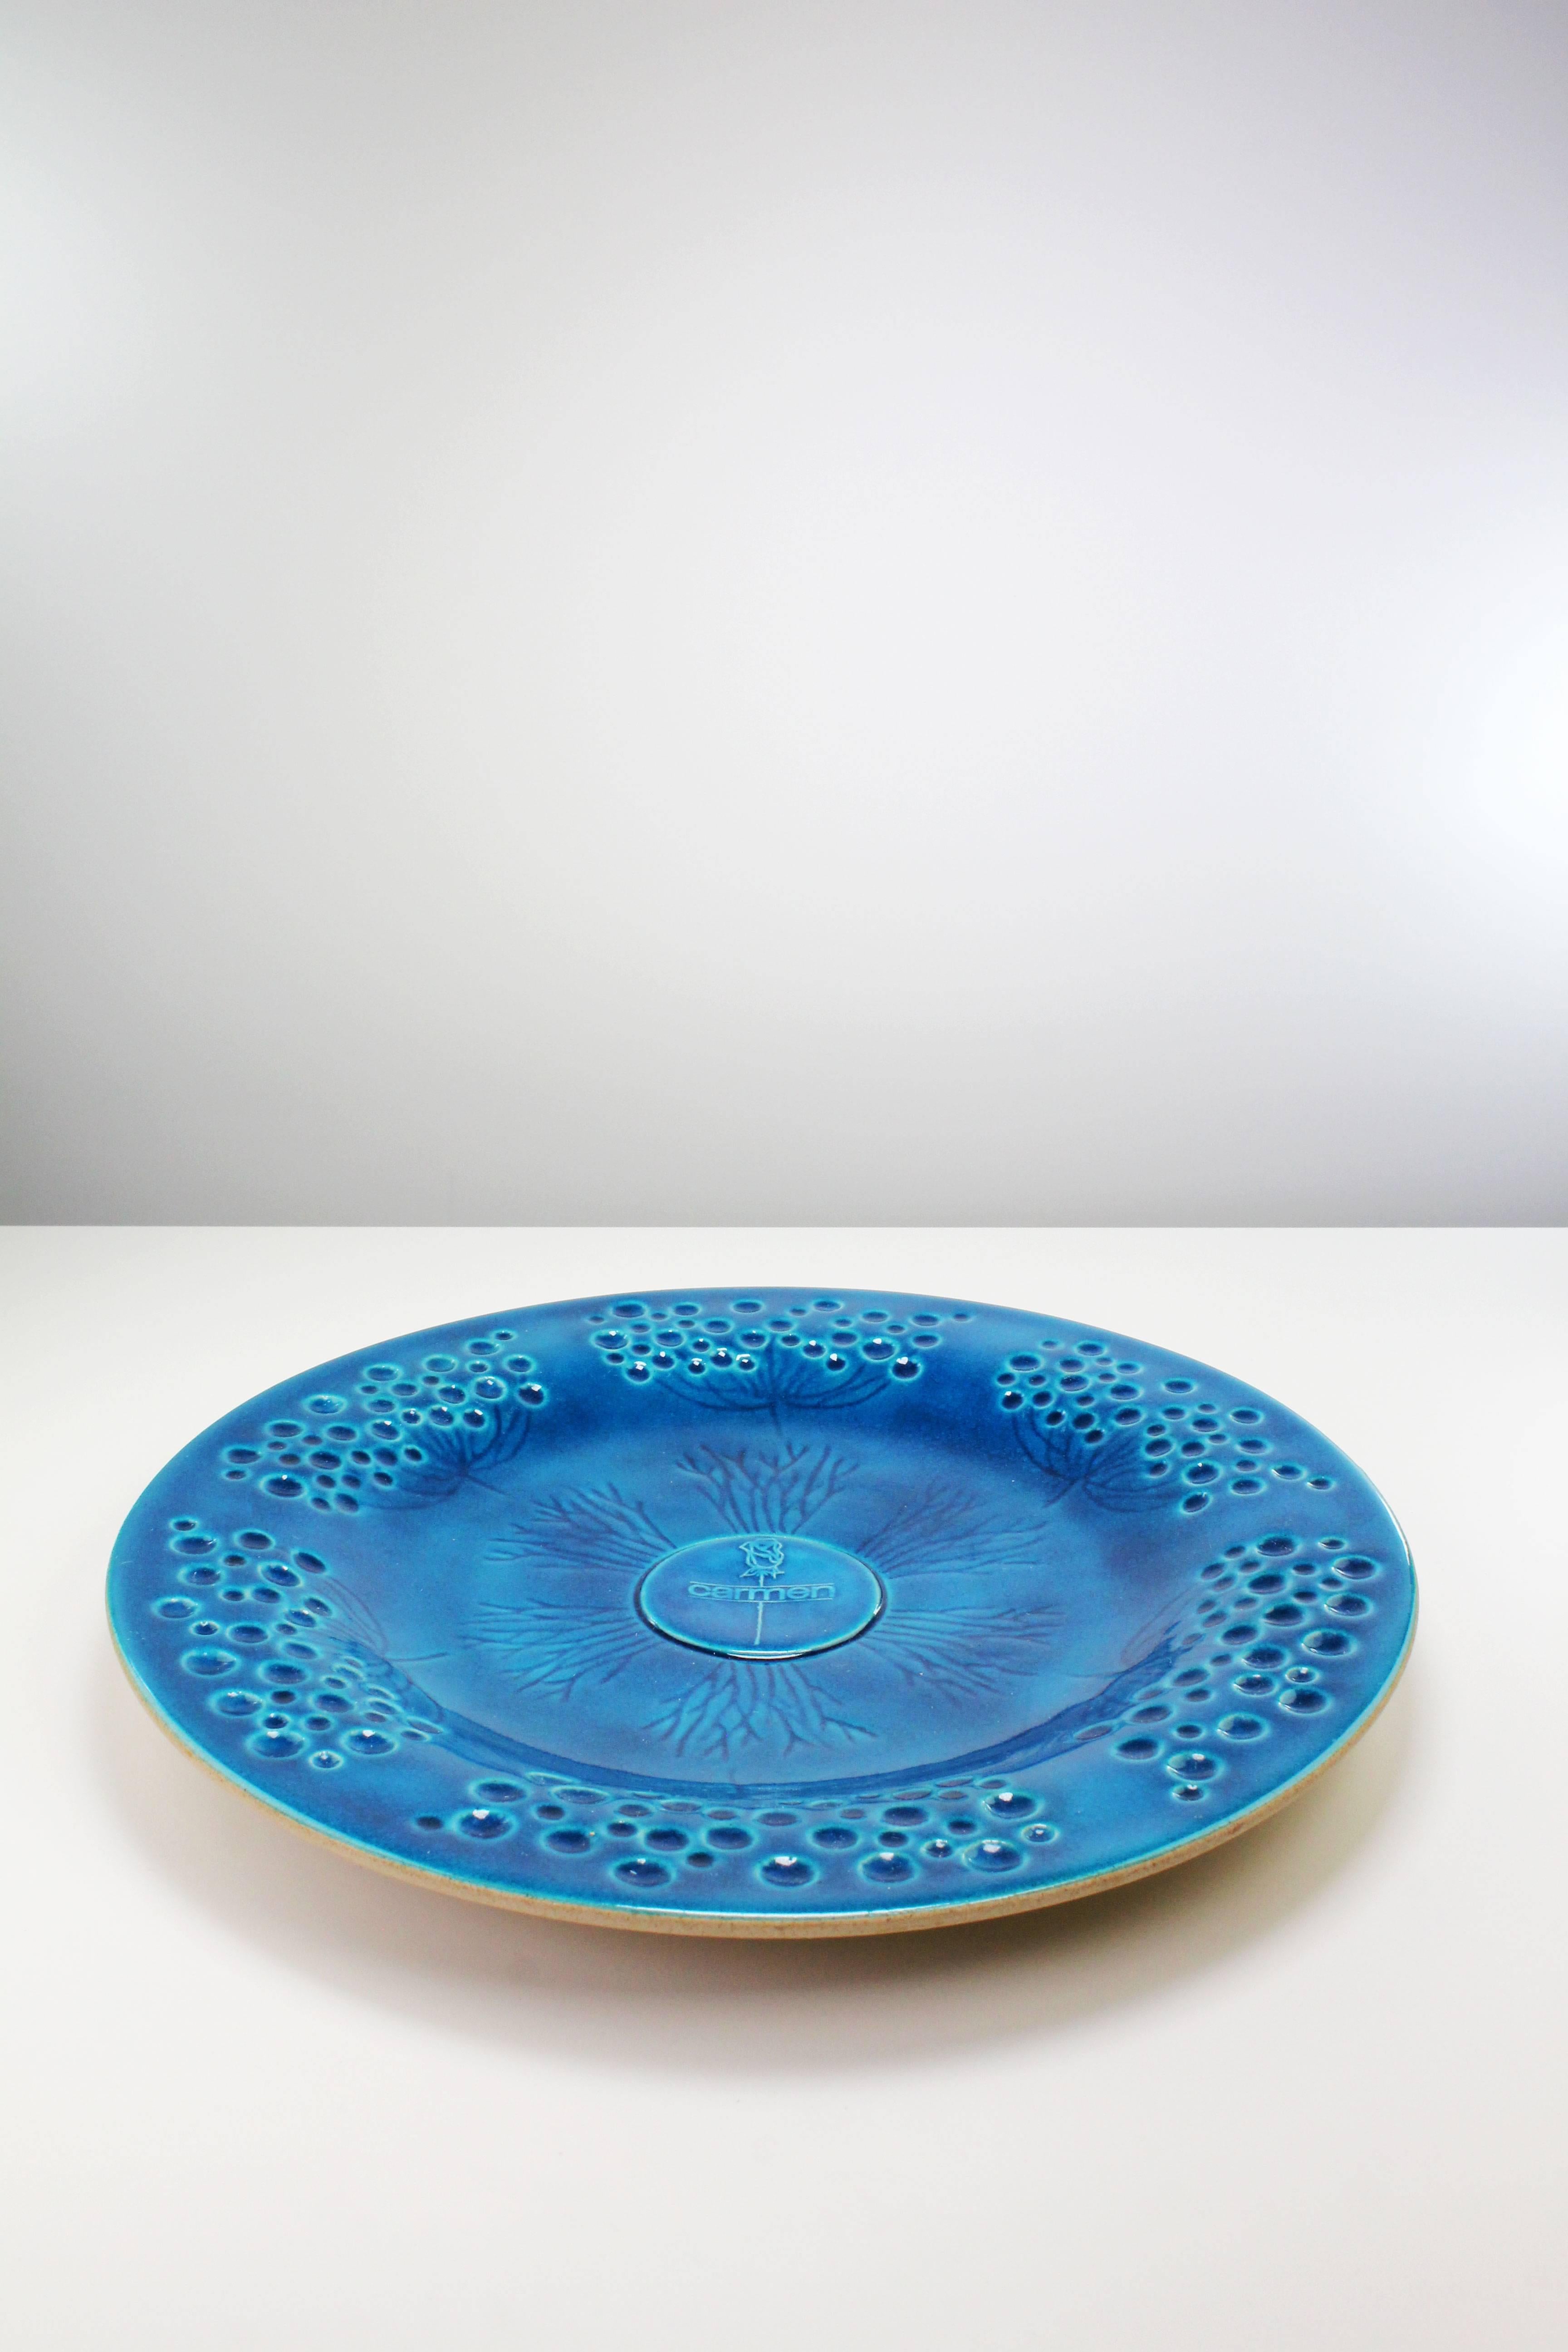 Stunning Danish midcentury modern Kähler handmade centrepiece, dish or wall decoration with glossy organic floral patterns and turquoise glaze - Kähler's signature color. The name Carmen is written in the middle accompanied by a long stemmed rose.